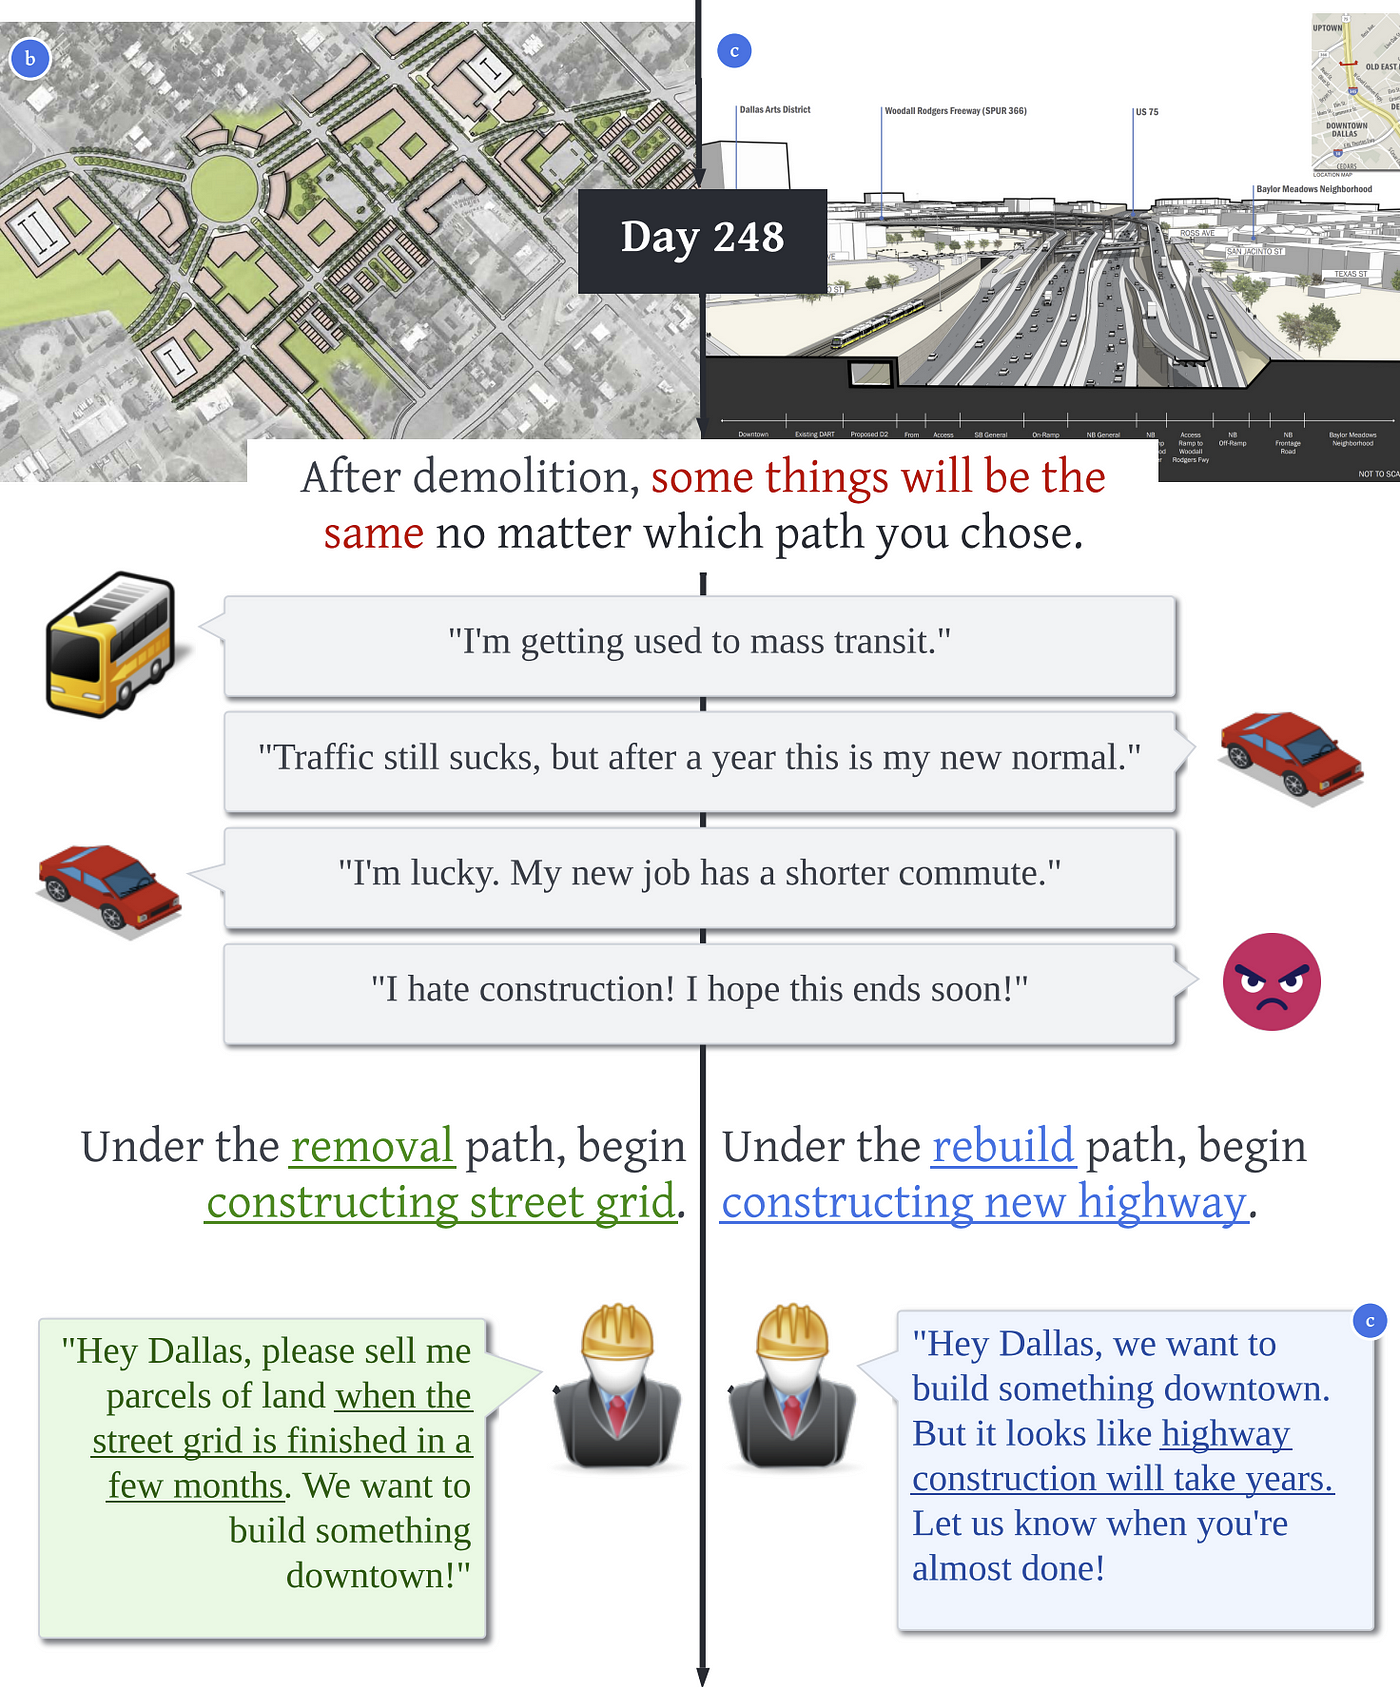 Fourth section of the infographic. After demolition, some things will be the same no matter which path you chose. Under the removal path, begin constructing the street grid. Under the rebuild path, begin constructing the new highway.